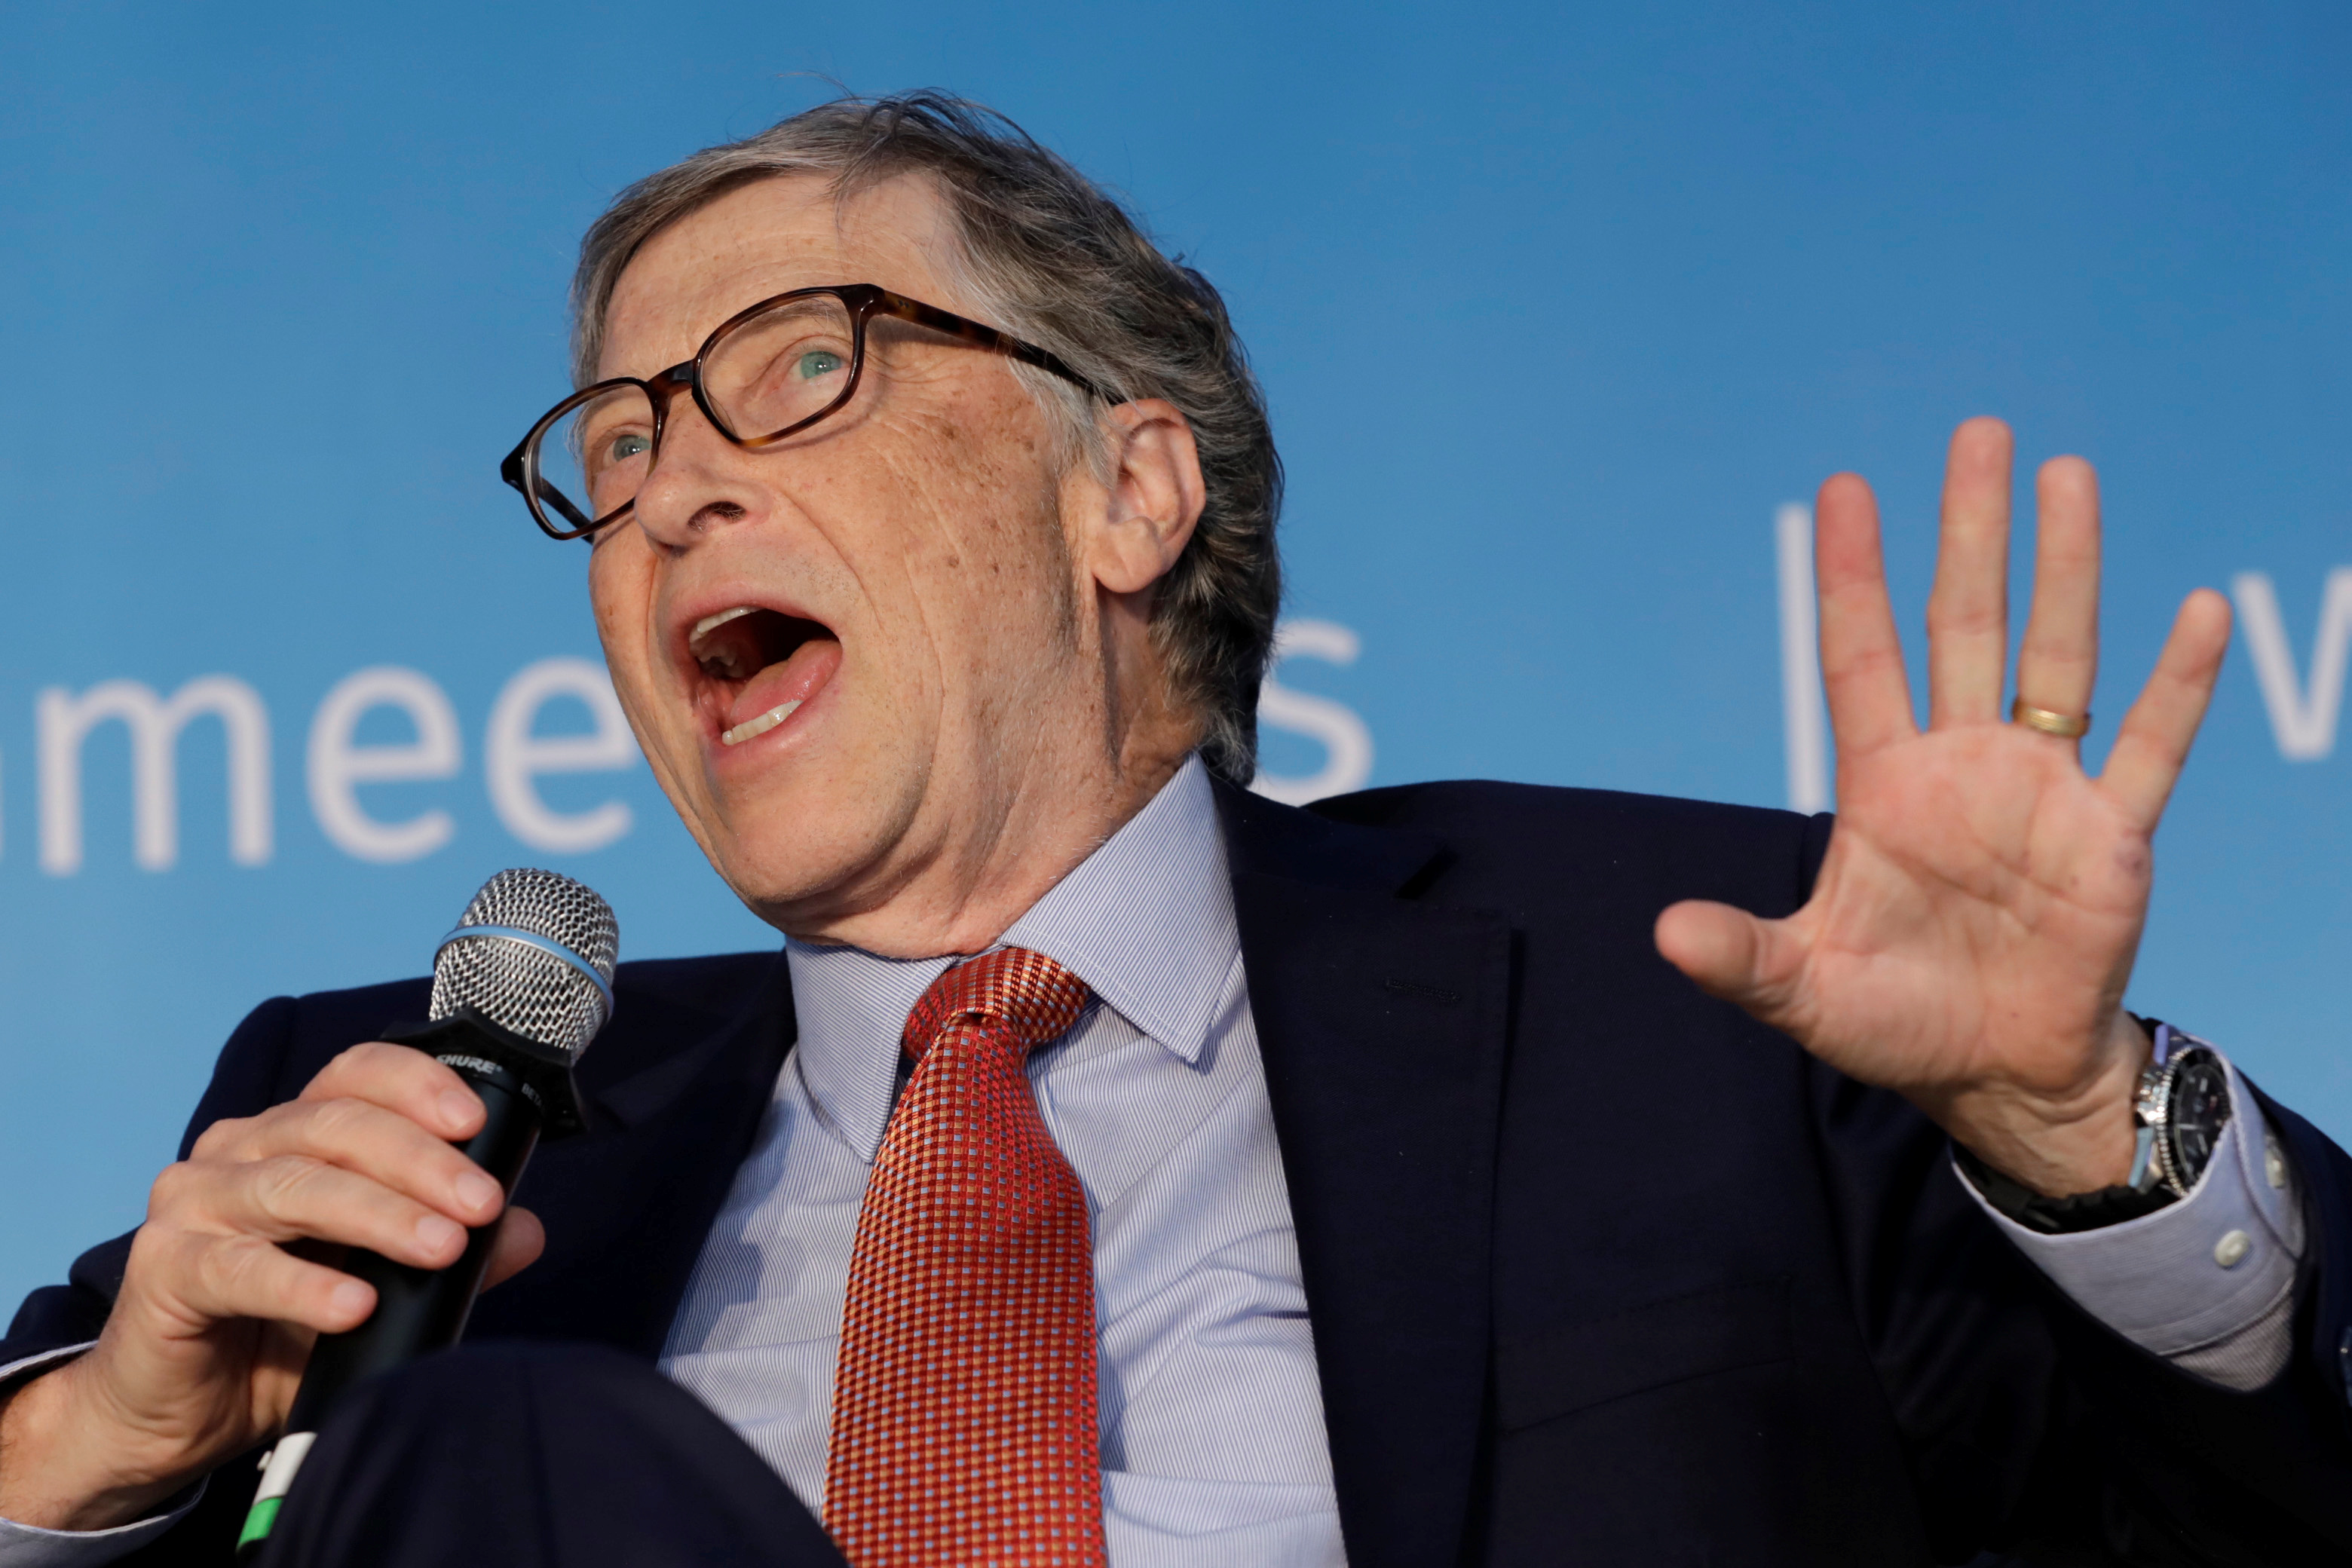 Bill Gates, co-chair of the Bill & Melinda Gates Foundation; speaks at a panel discussion in Washington